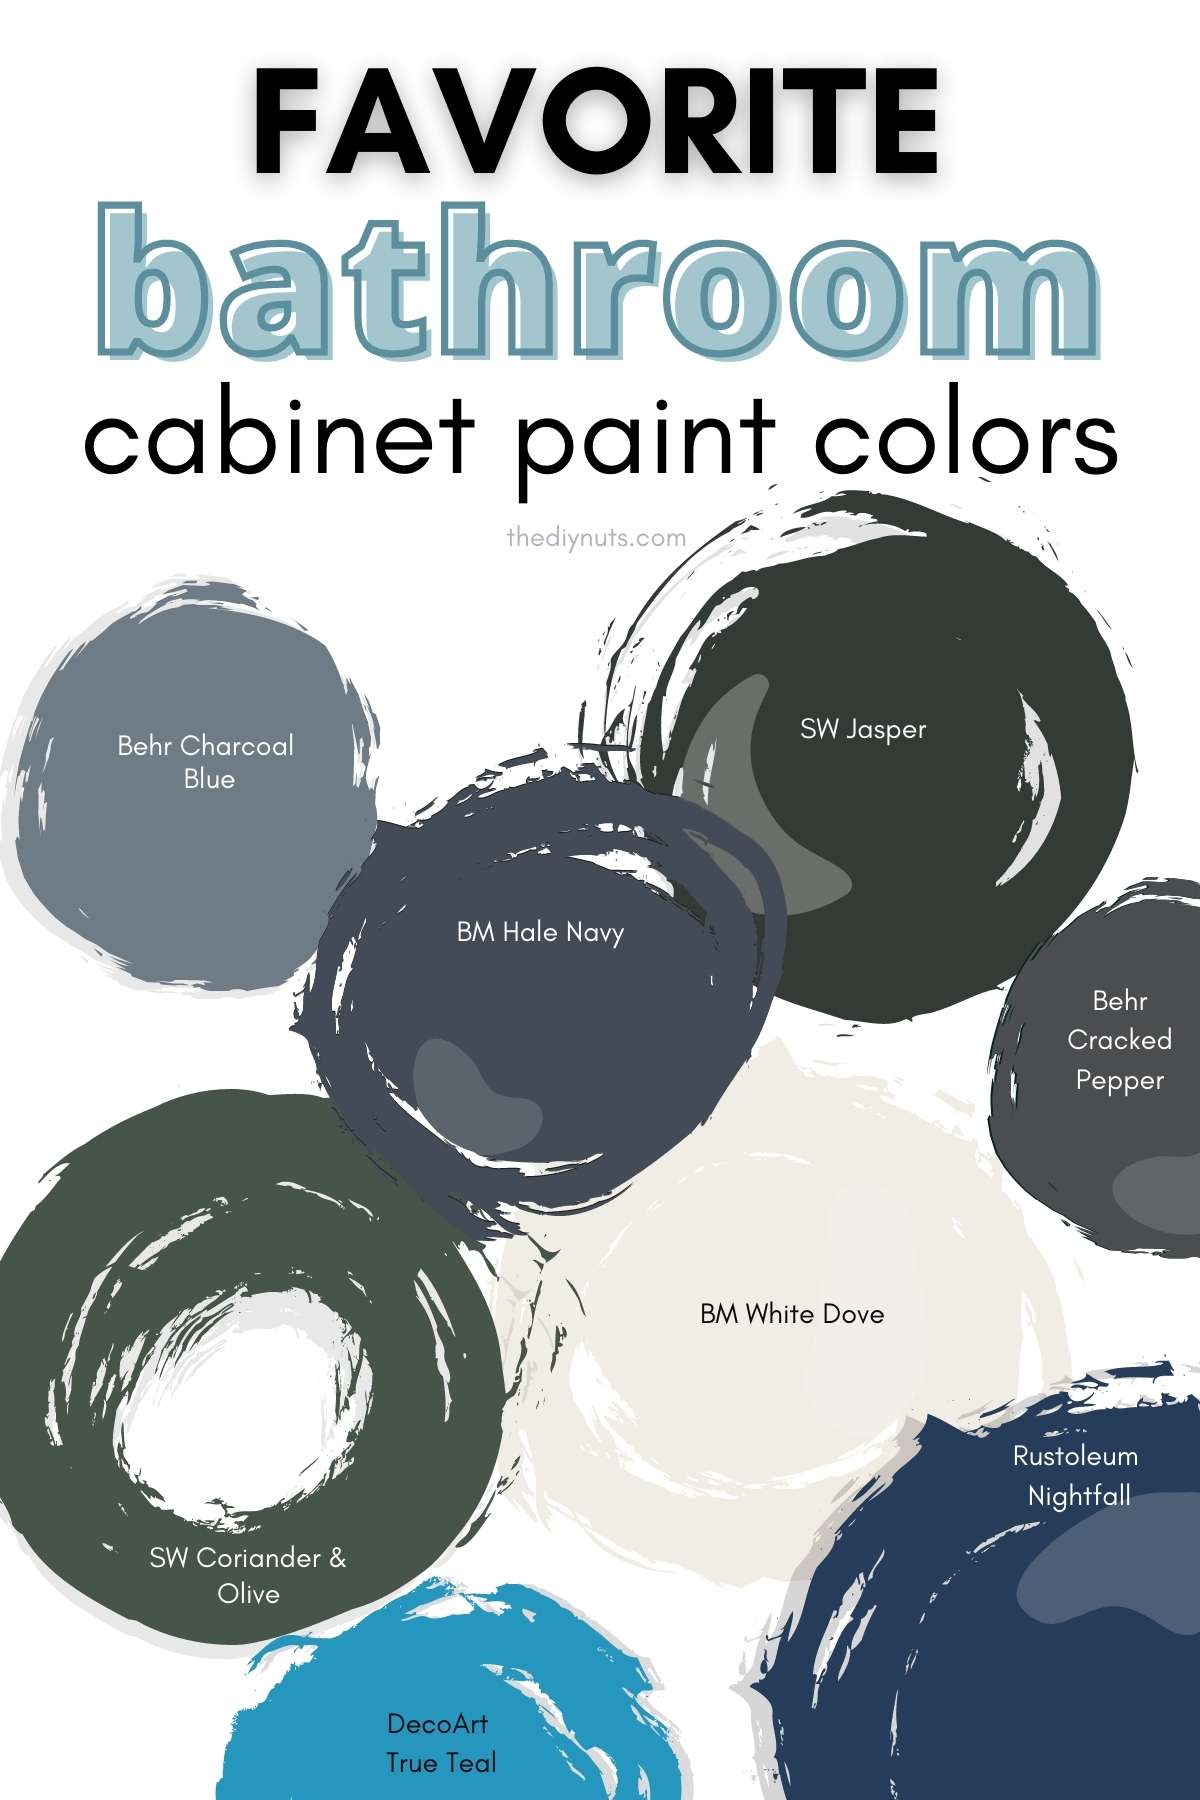 favorite bathroom cabinet paint colors with blue, grays and cream paint swatches.